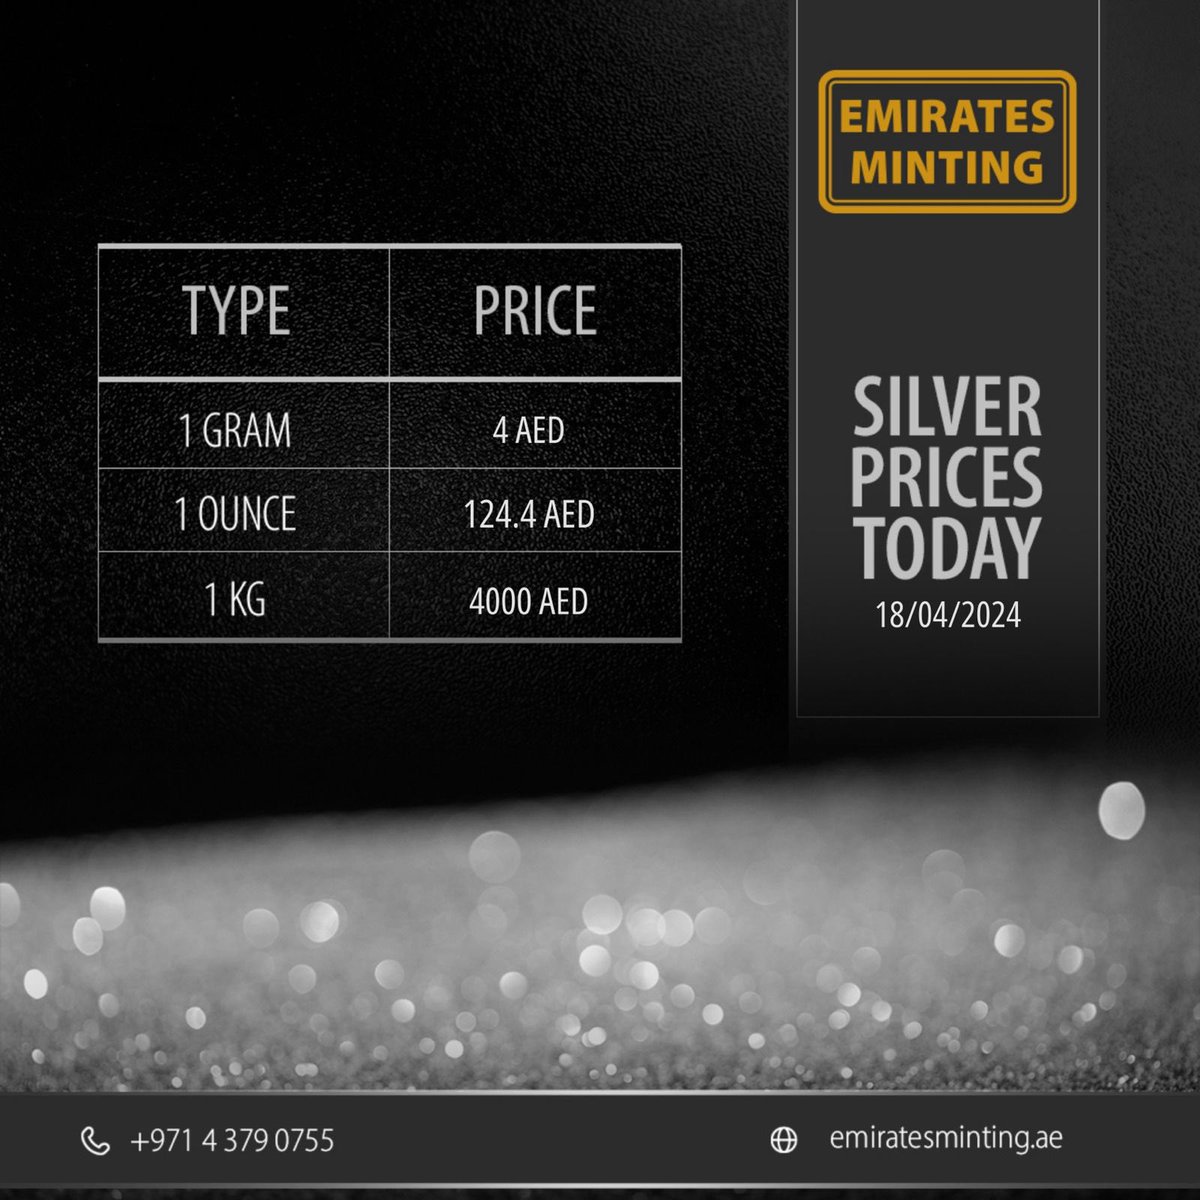 In a daily financials, Gold and Silver prices reveal ongoing fluctuations. 
(Gold & Silver Prices)
.
.
 #emiratesminting #Goldinvesting #Gold #Silver #Bullion #GoldBars #SilverBars #InvestmentPortfolio #BuyGold #GoldBullion #GoldCoins #SilverCoins #PureElegance